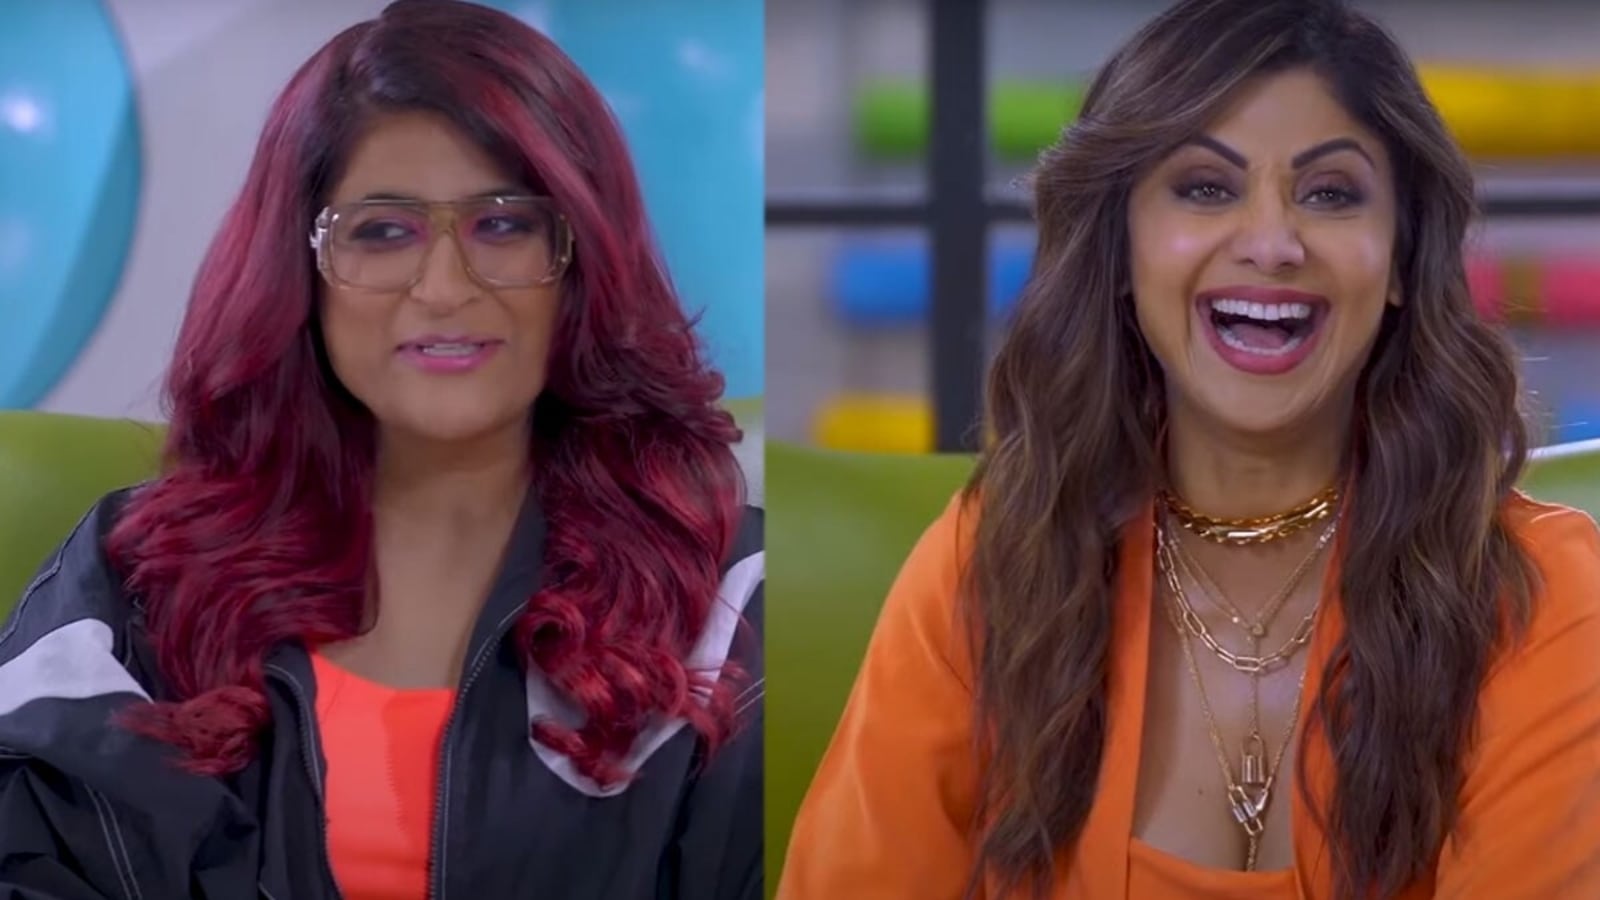 Tahira Kashyap tells Shilpa Shetty about her sex life with Ayushmann Khurrana: ‘Even a quickie costs a lot of calories’